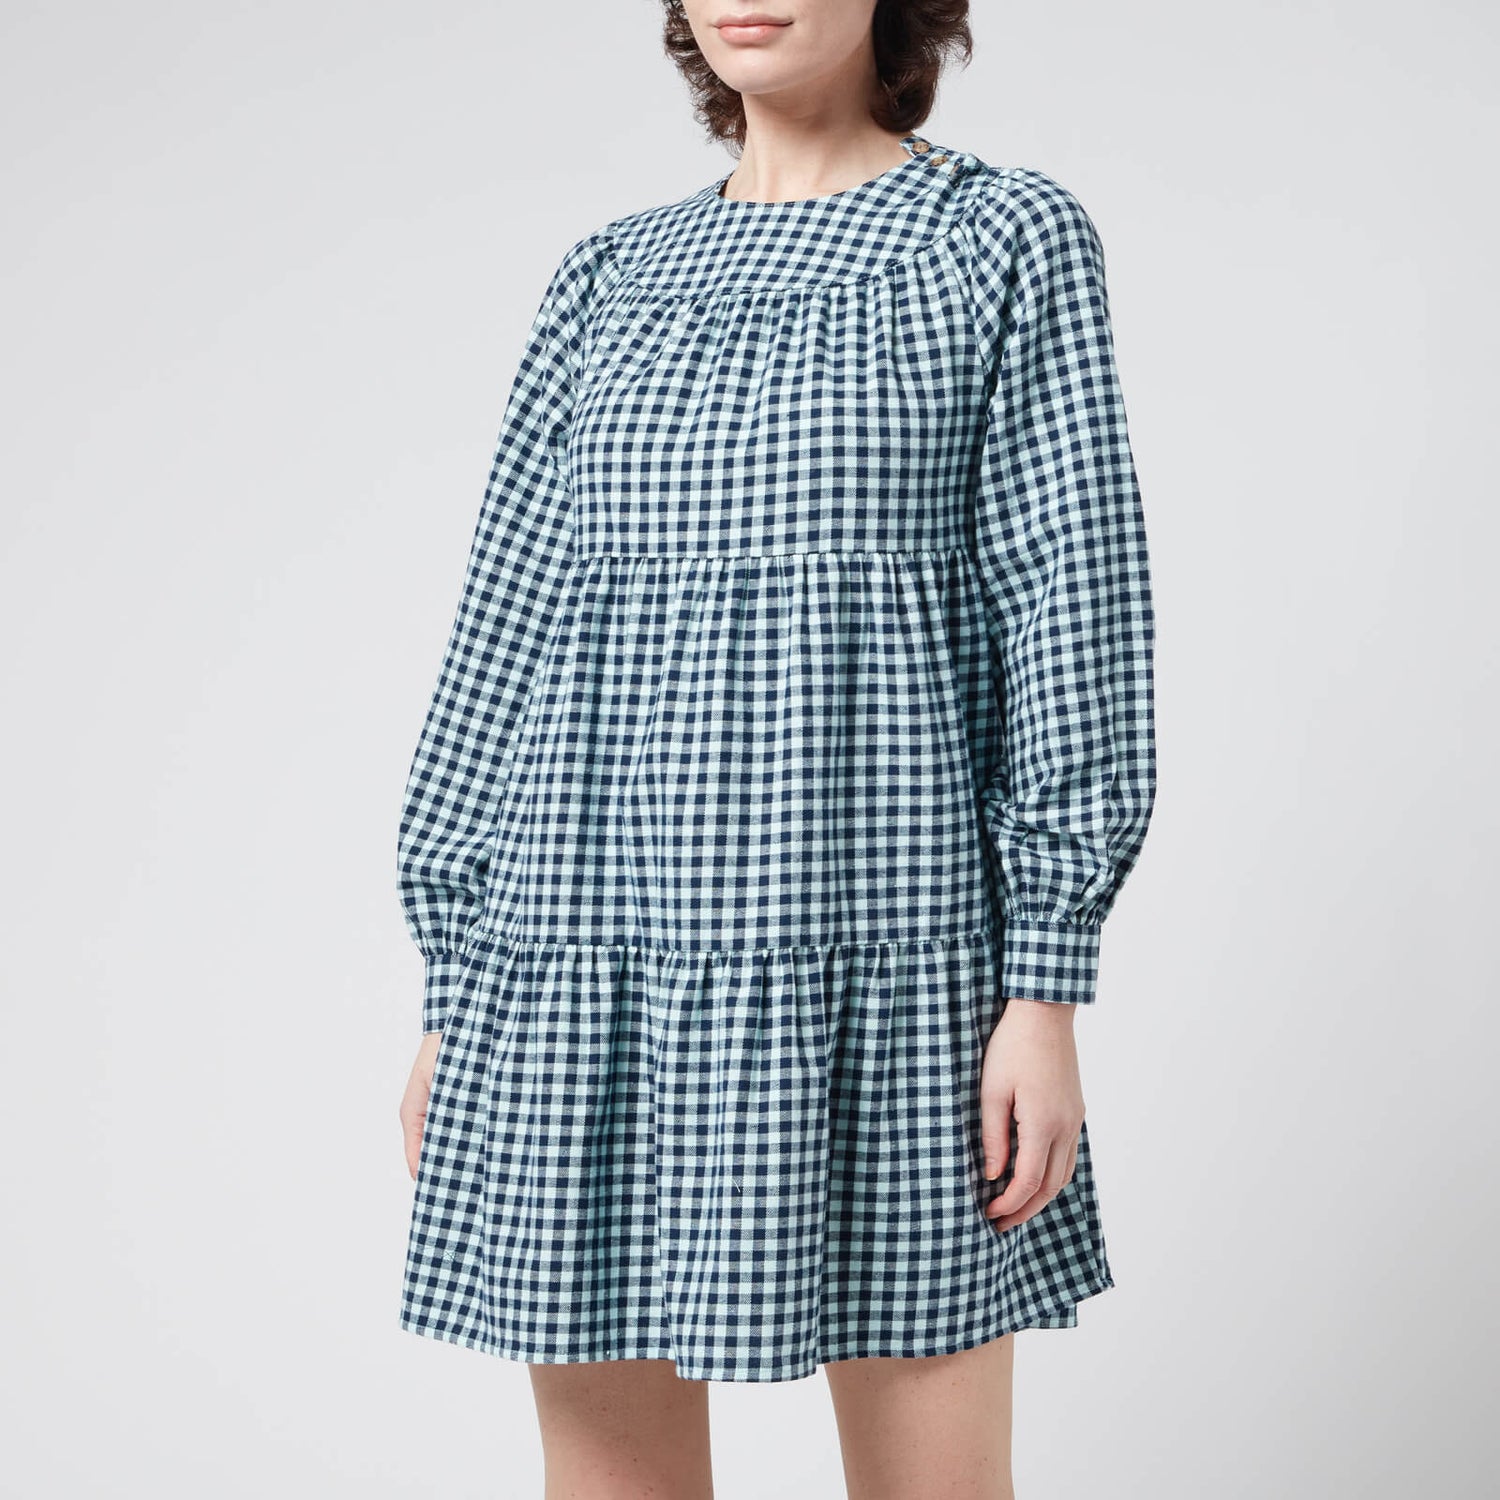 Whistles Women's Gingham Check Tiered Trapeze Dress - Multi - UK 6